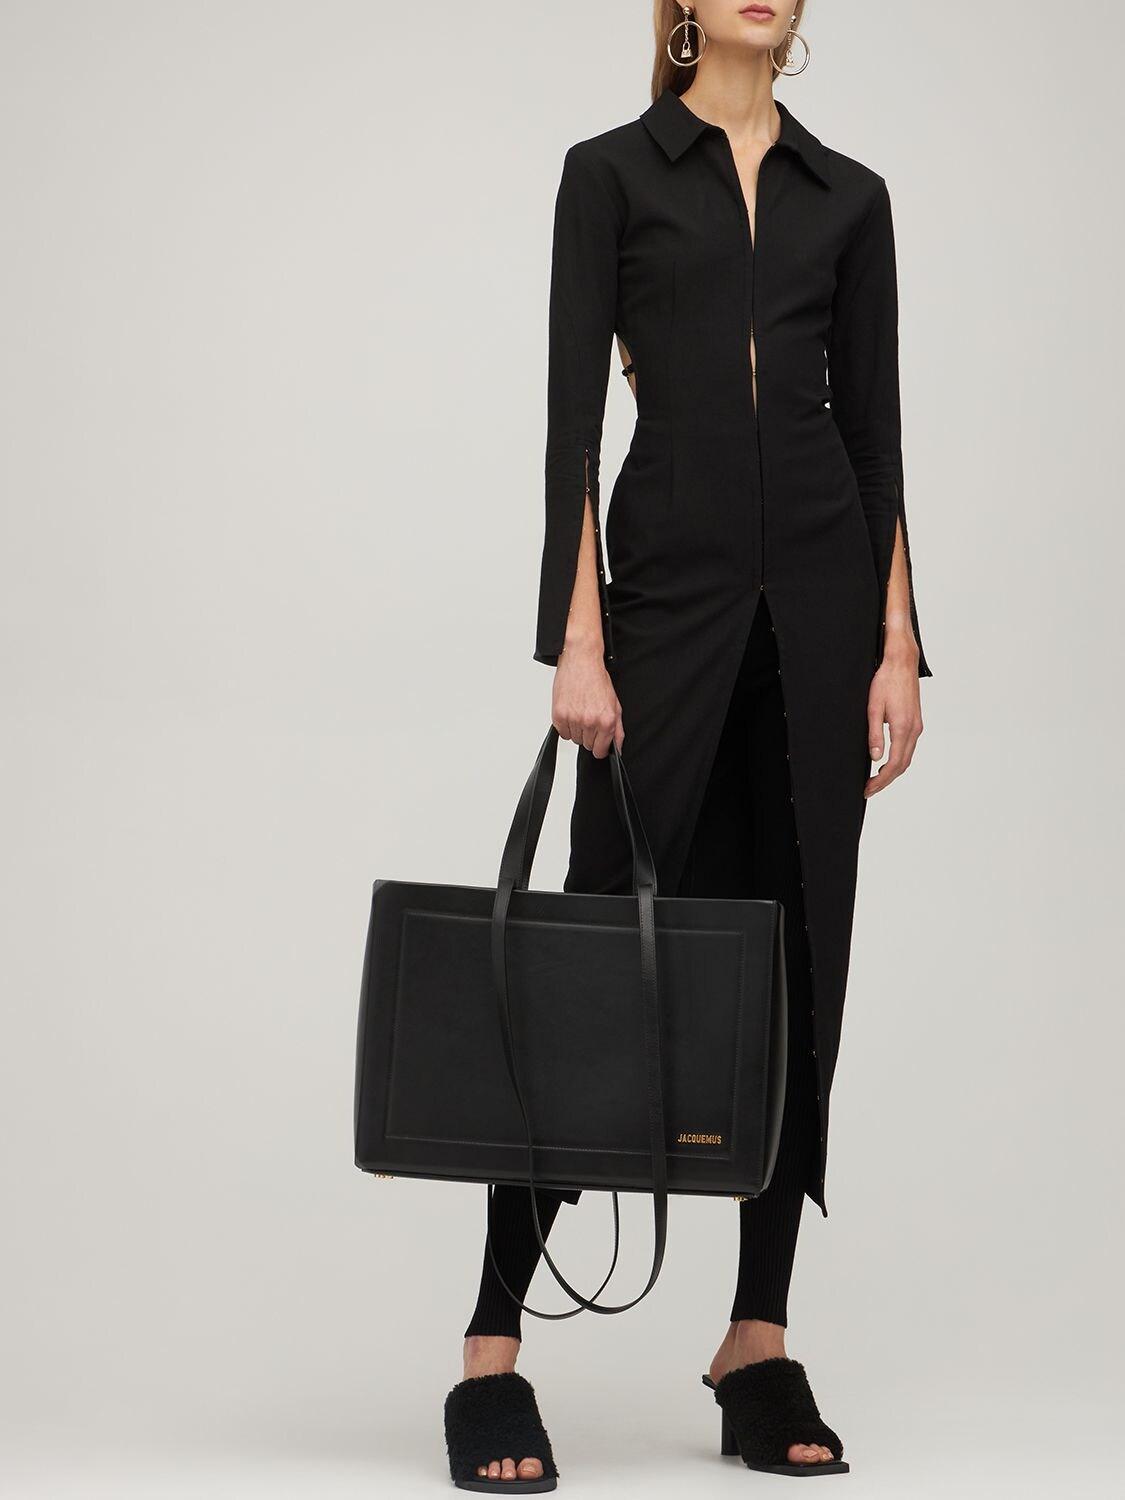 Jacquemus Le Cabas Neve Leather Tote Bag in Black | Lyst